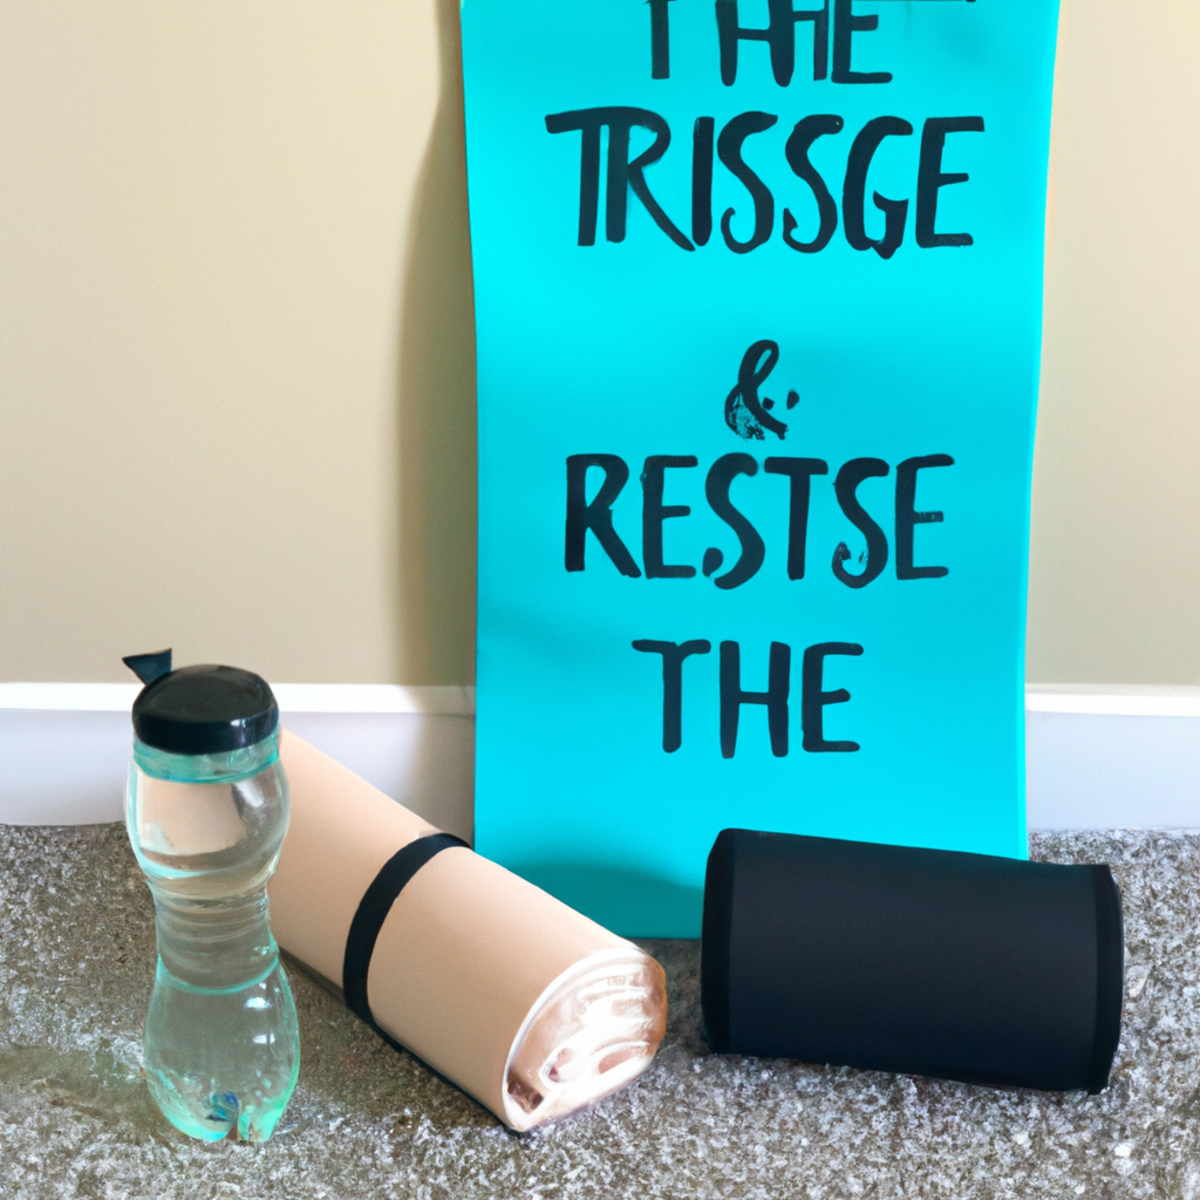 The photo shows a yoga mat on the floor with a pair of dumbbells and a resistance band next to it, perfect for at-home workouts. In the center of the mat, there is a water bottle and a towel. The background is a neutral-colored wall with a motivational quote written in bold letters. The lighting is bright and natural, creating a warm and inviting atmosphere. The objects in the photo suggest that the article will provide a quick and effective abs workout that can be done at home with minimal equipment, catering to those who prefer at-home workouts.